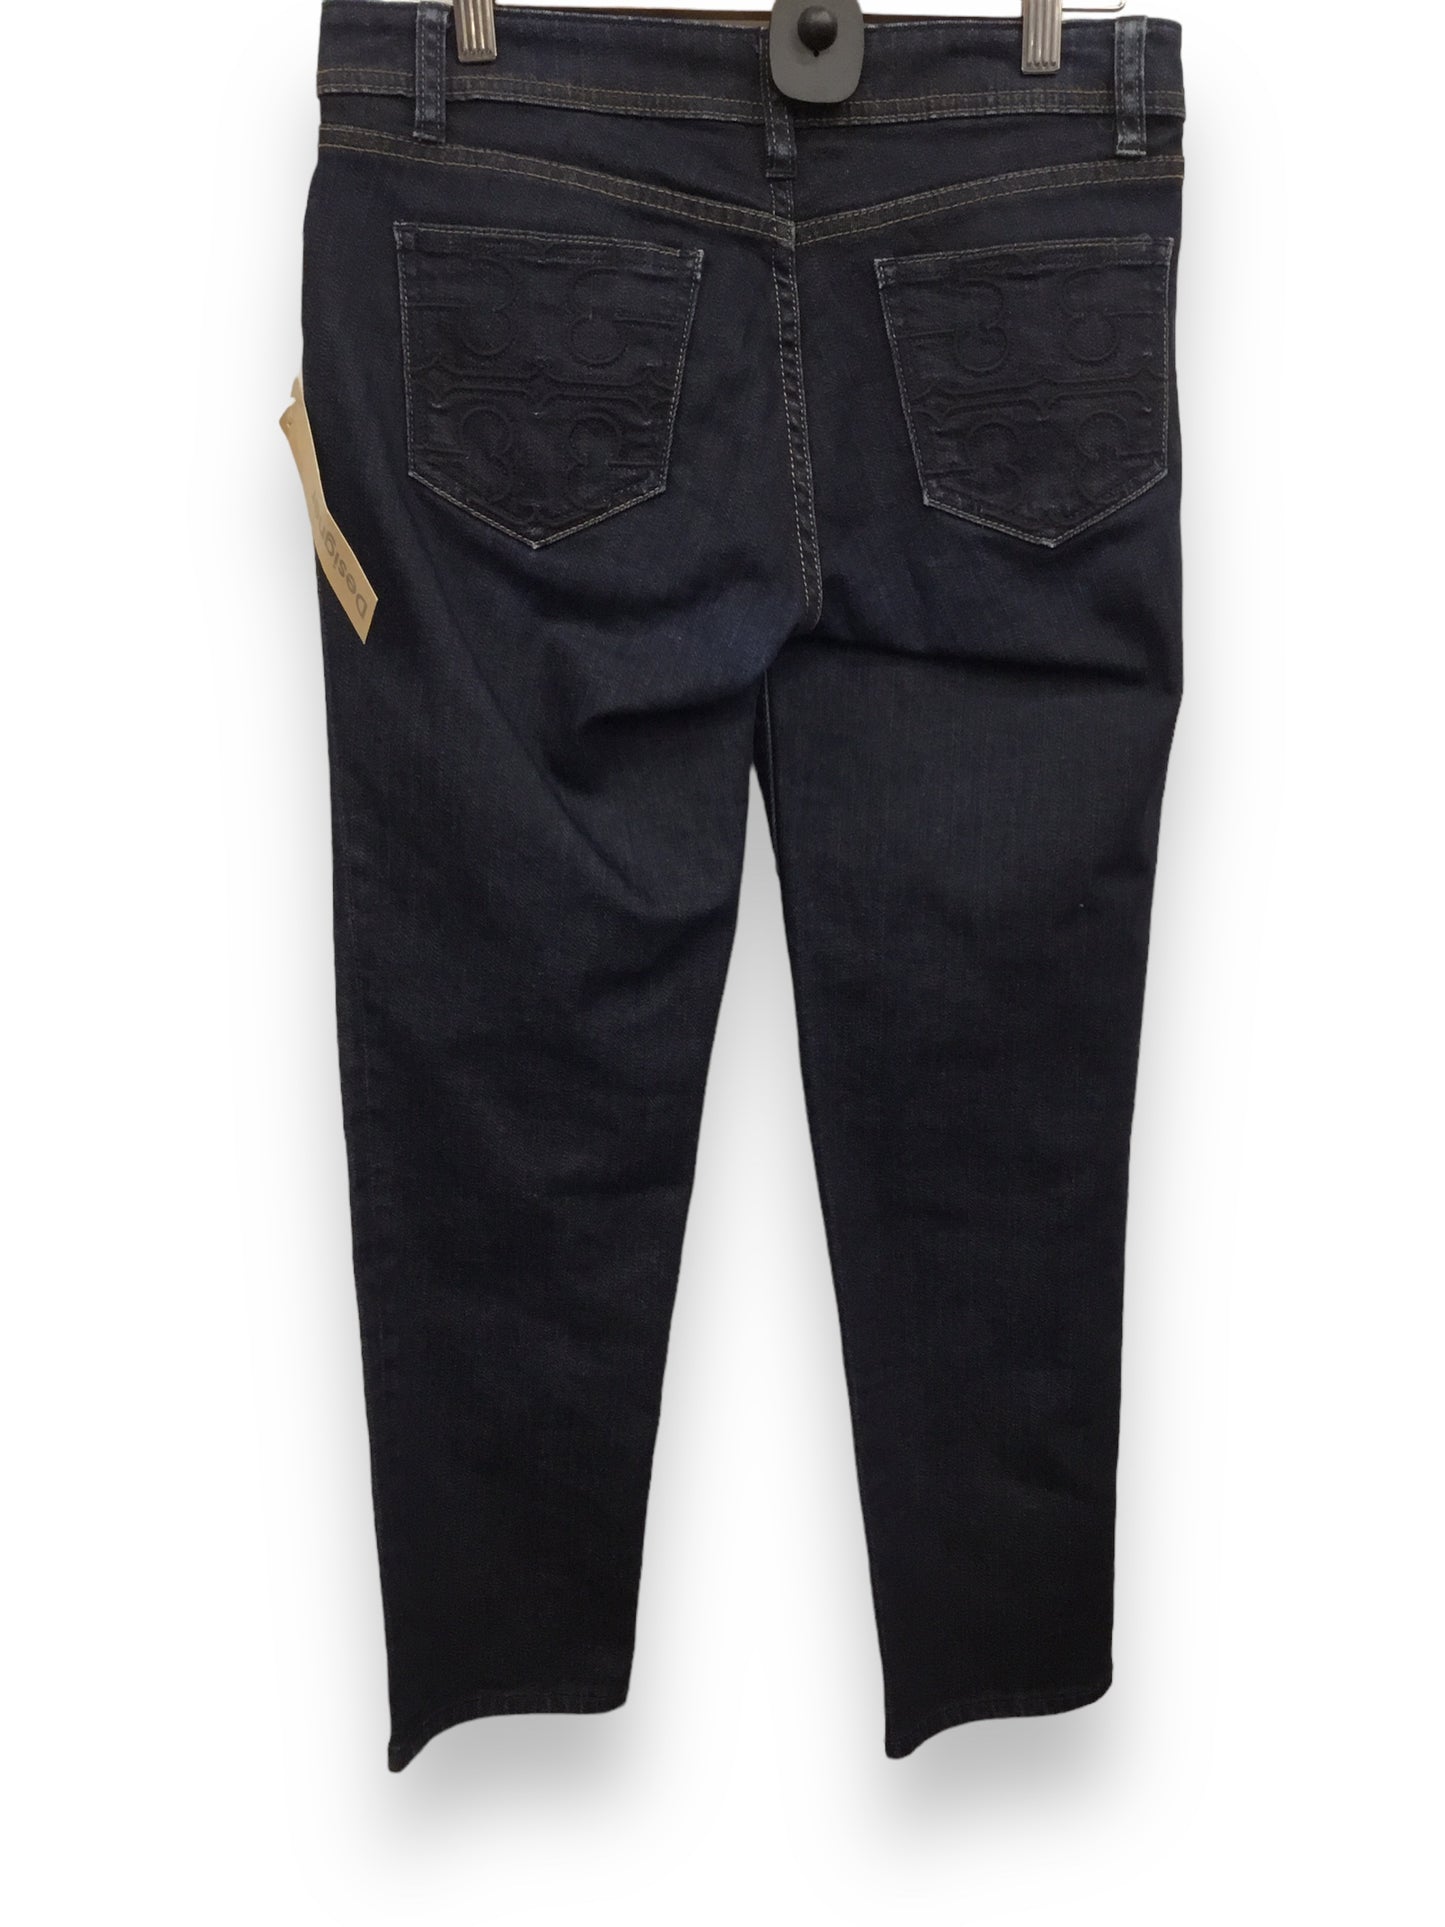 Jeans Designer By Tory Burch  Size: 2